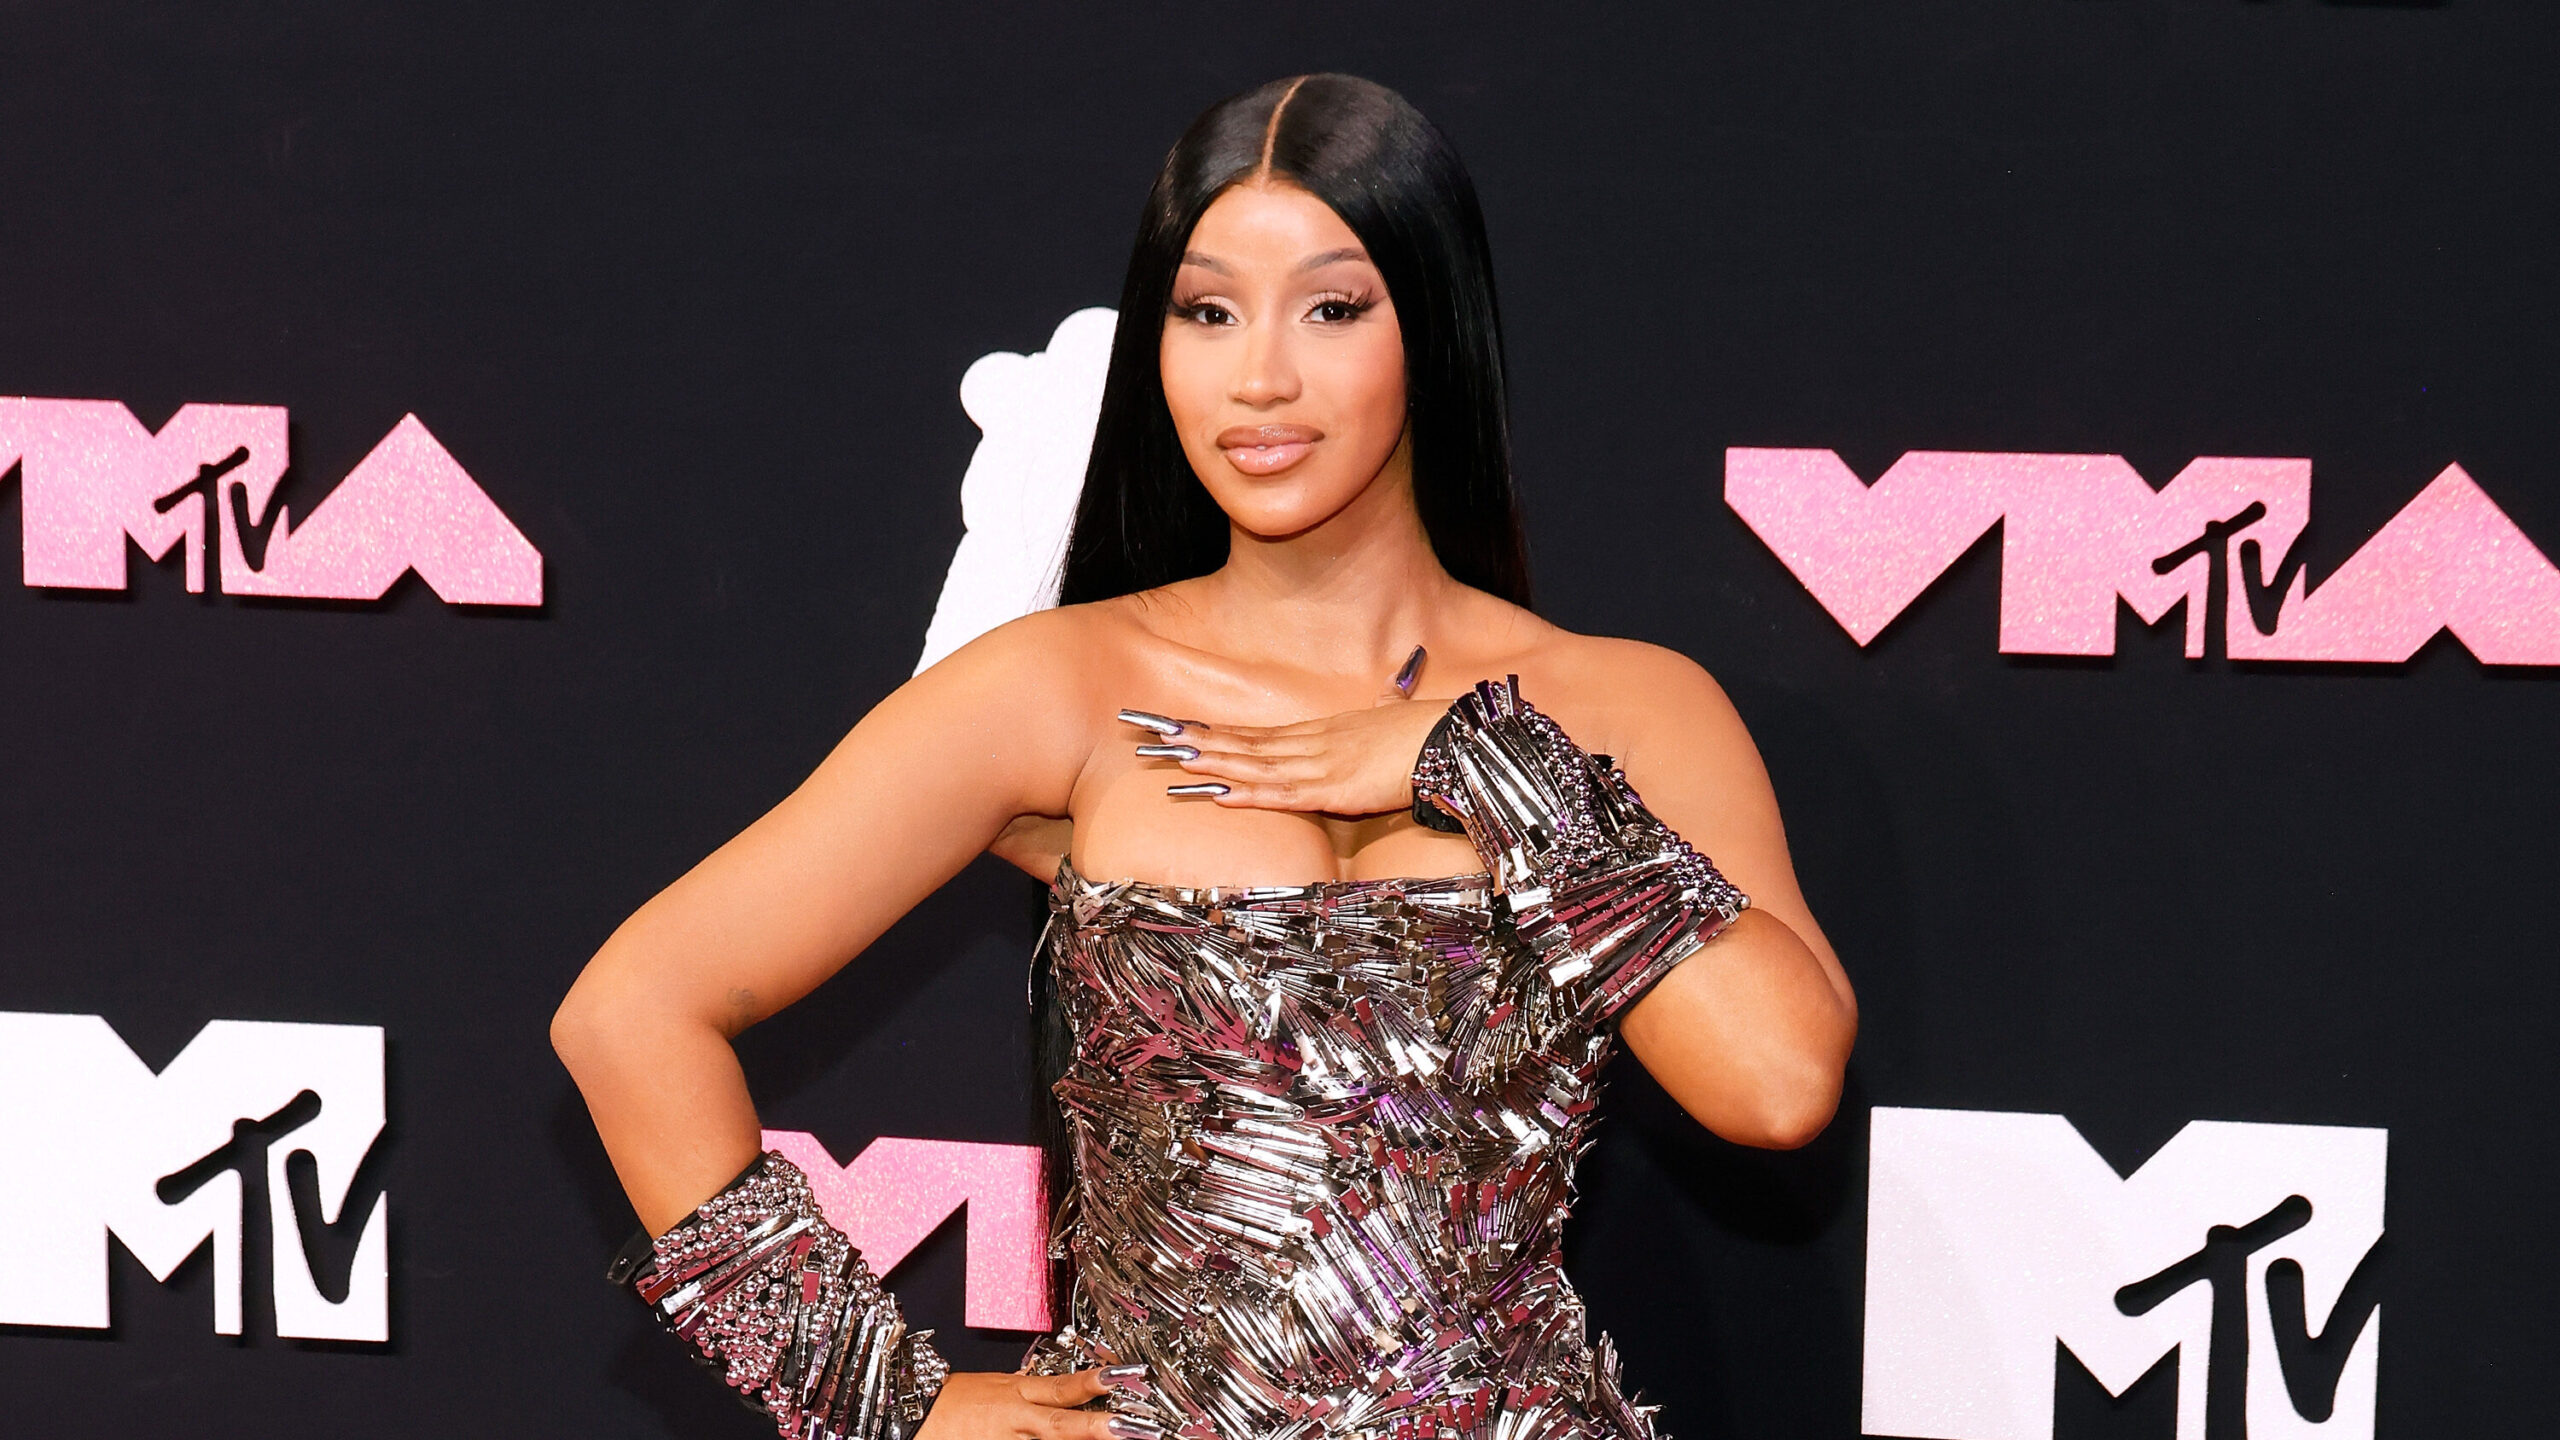 Cardi B attends the 2023 MTV Video Music Awards at Prudential Center on September 12, 2023 in Newark, New Jersey.